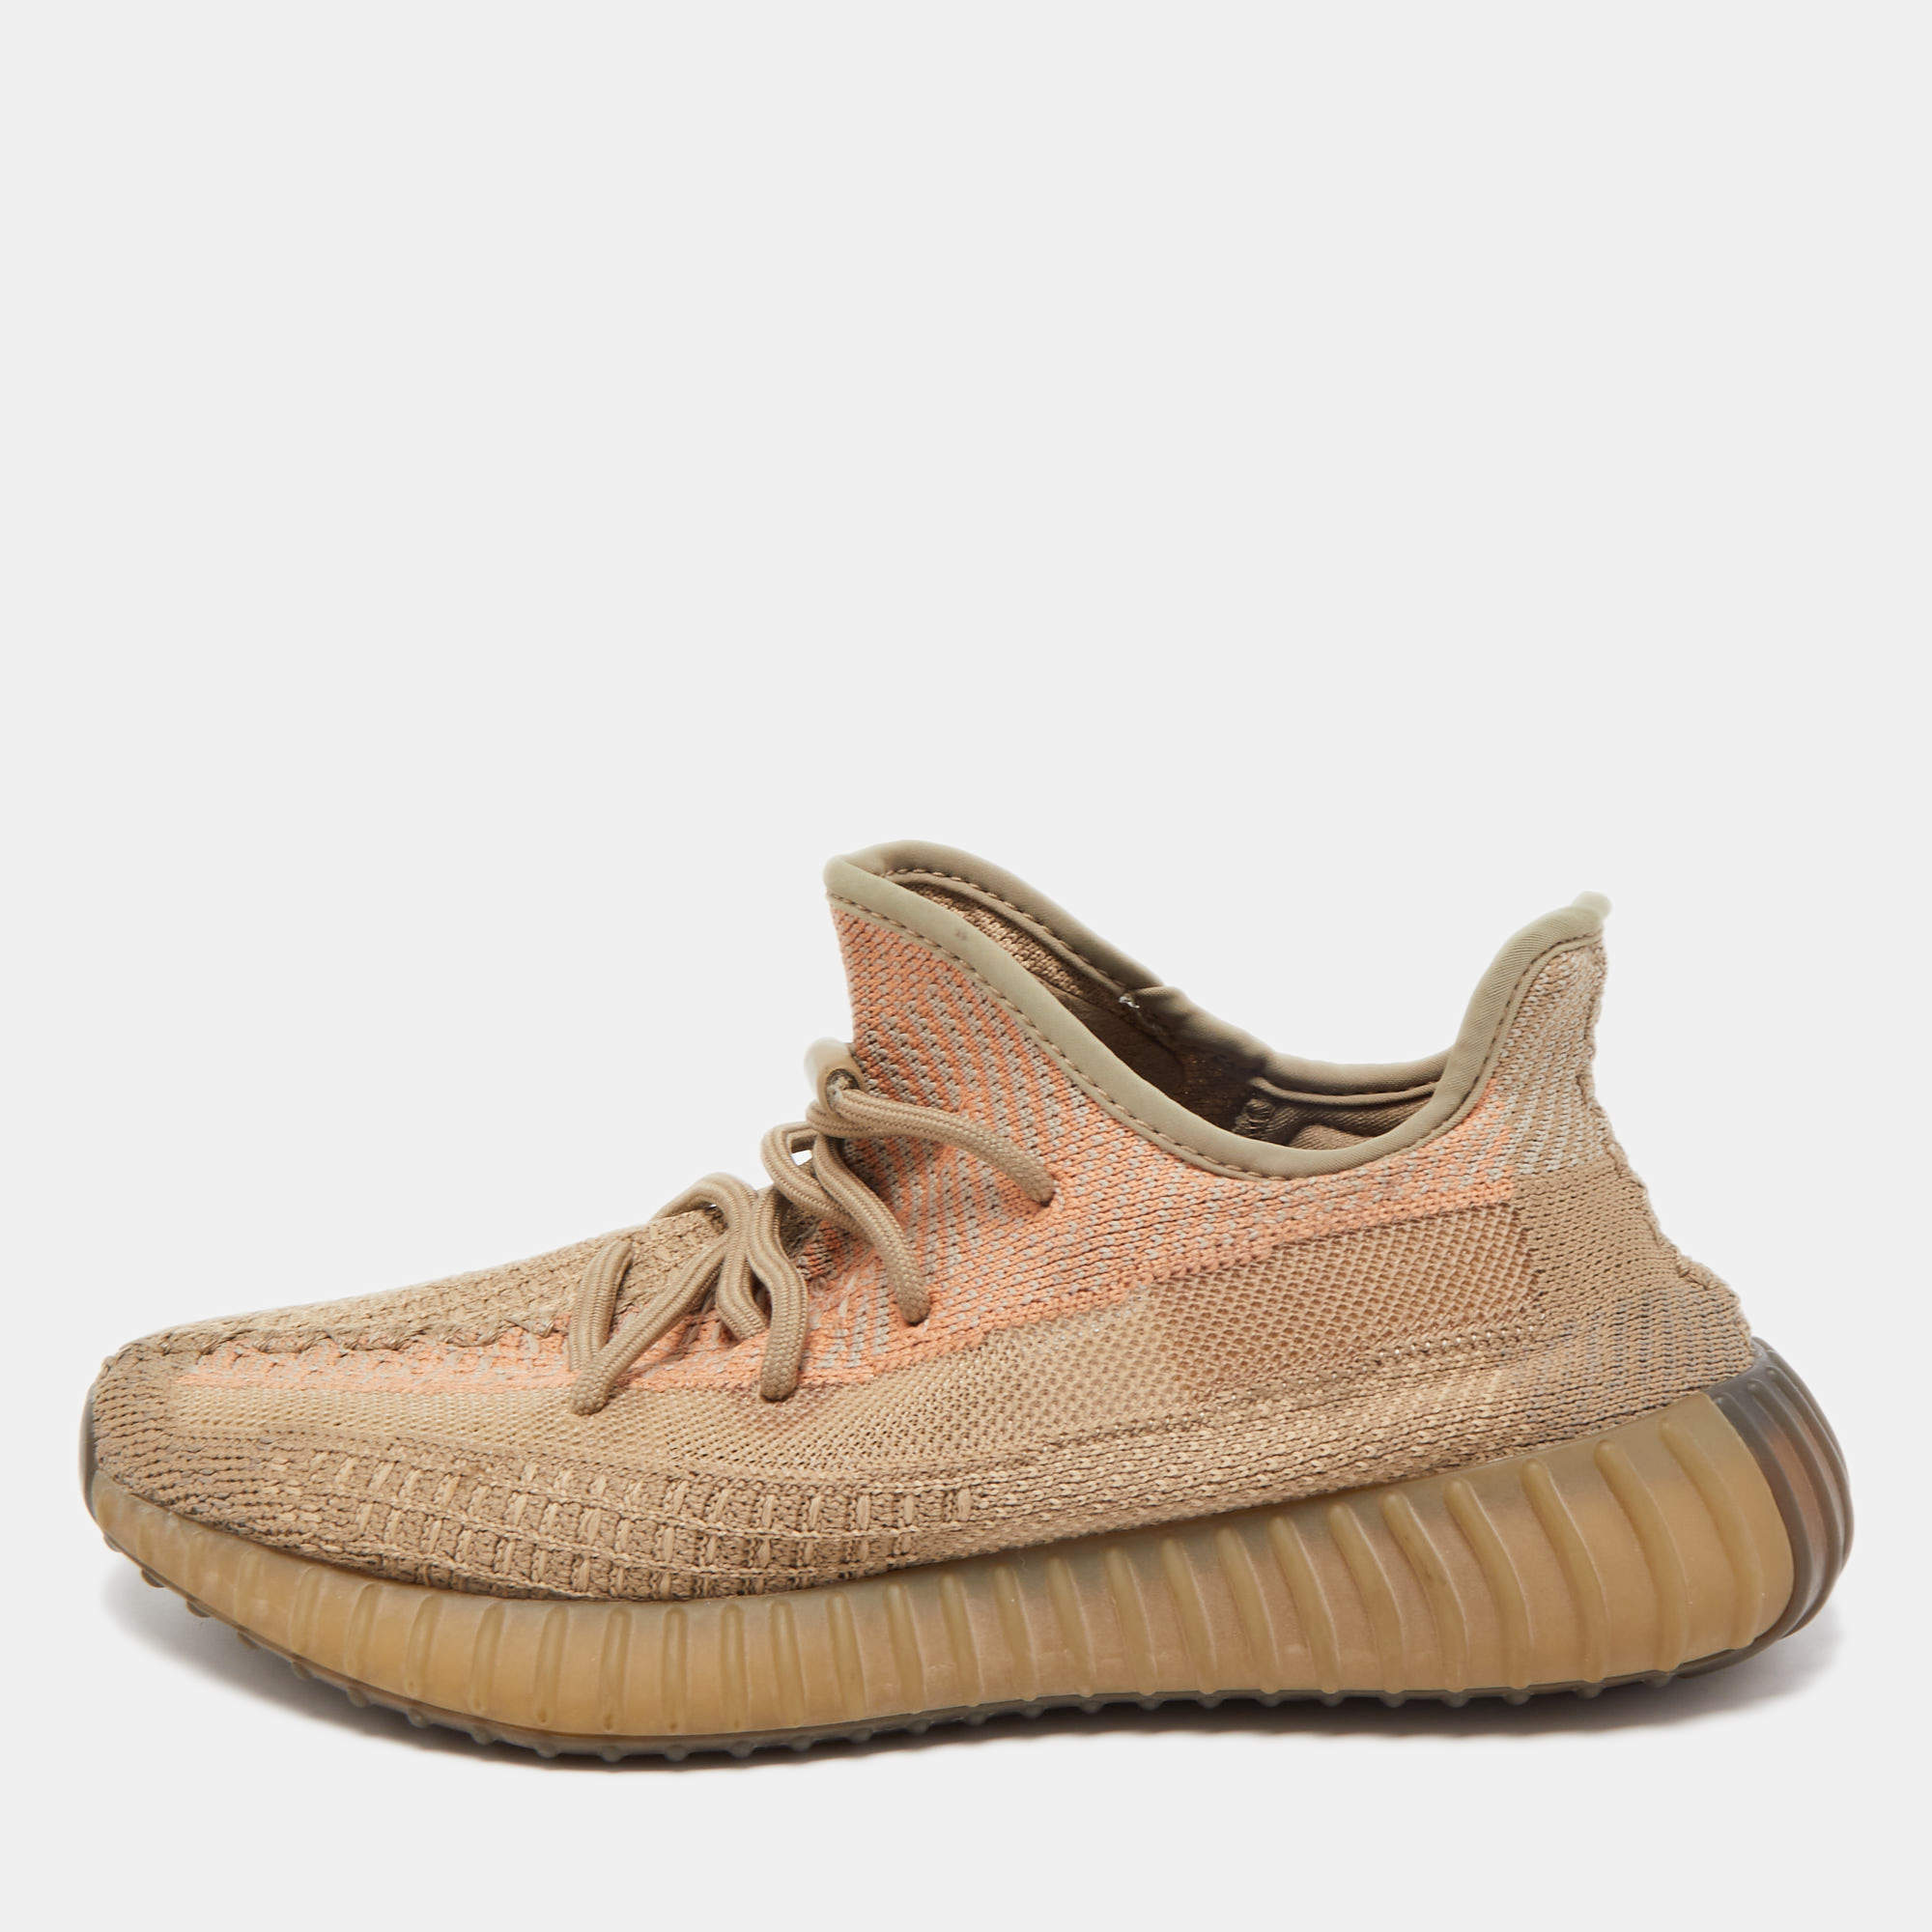 Yeezy x Adidas Brown Knit Fabric Boost 350 V2 Sand Taupe Sneakers Size 40